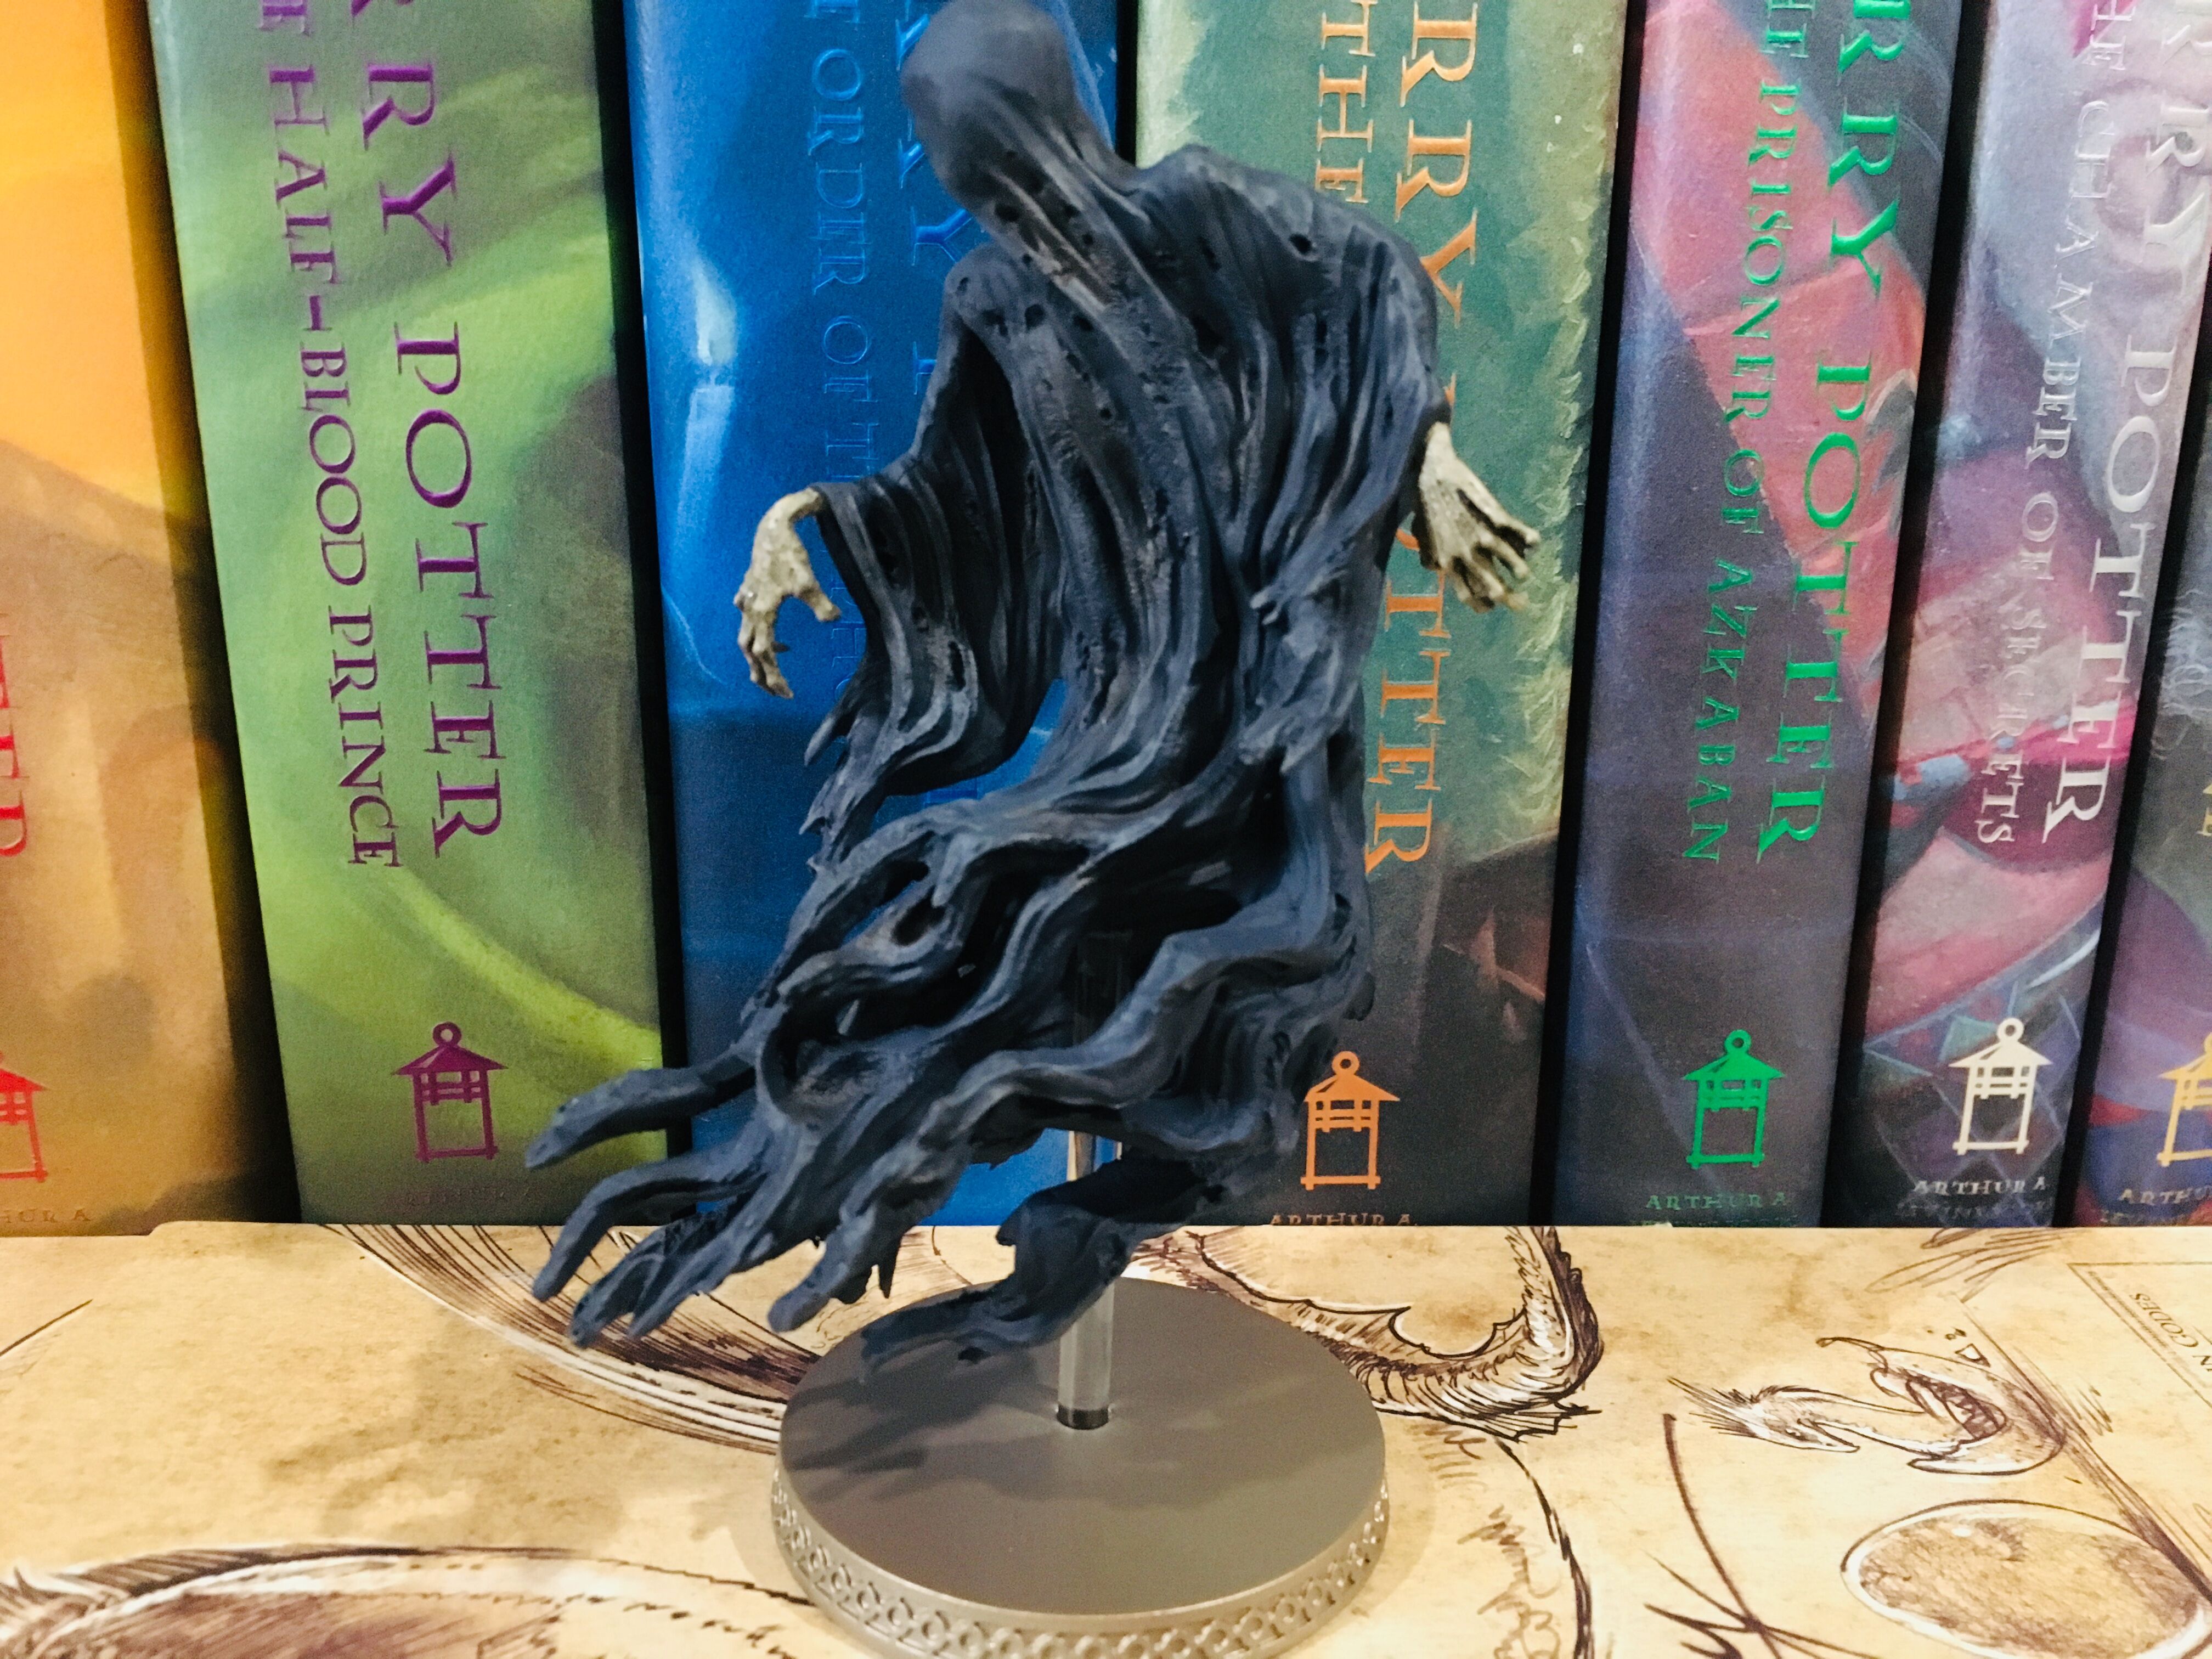 The Dementor’s cloak is carefully sculpted to give the illusion of flight.